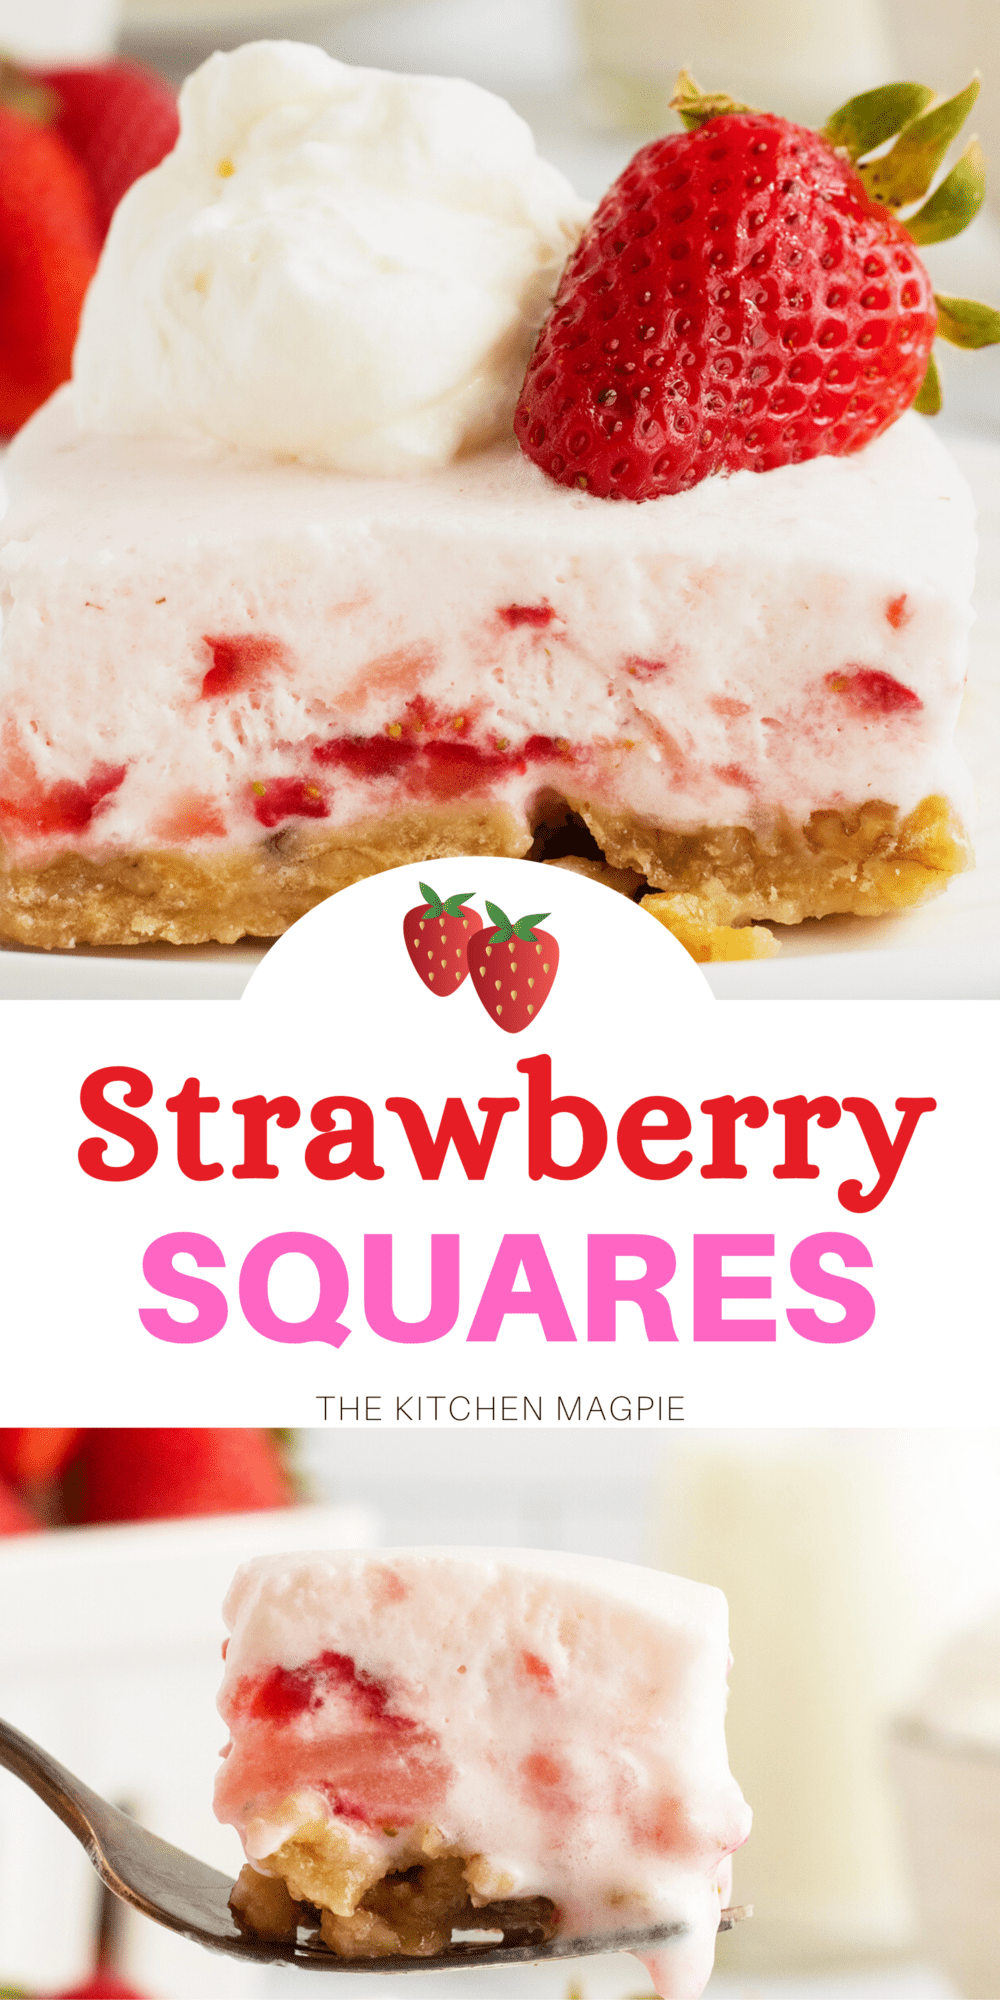 Simple, sweet, and super summery, this recipe for strawberry squares is the perfect warm weather treat.